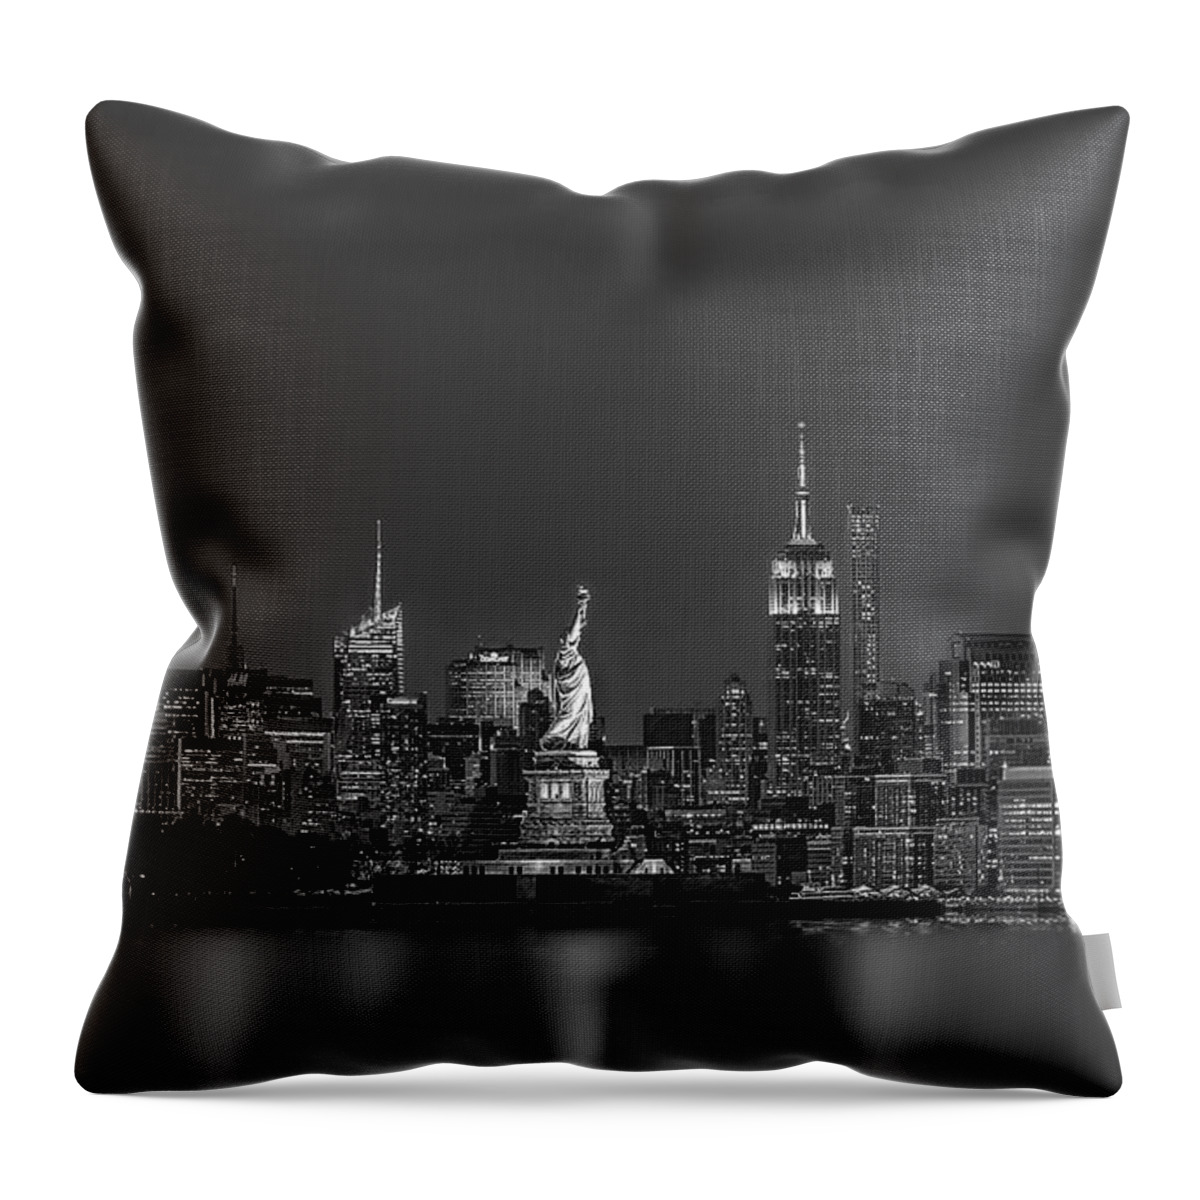 Statue Of Liberty Throw Pillow featuring the photograph Empire State And Statue Of Liberty BW by Susan Candelario